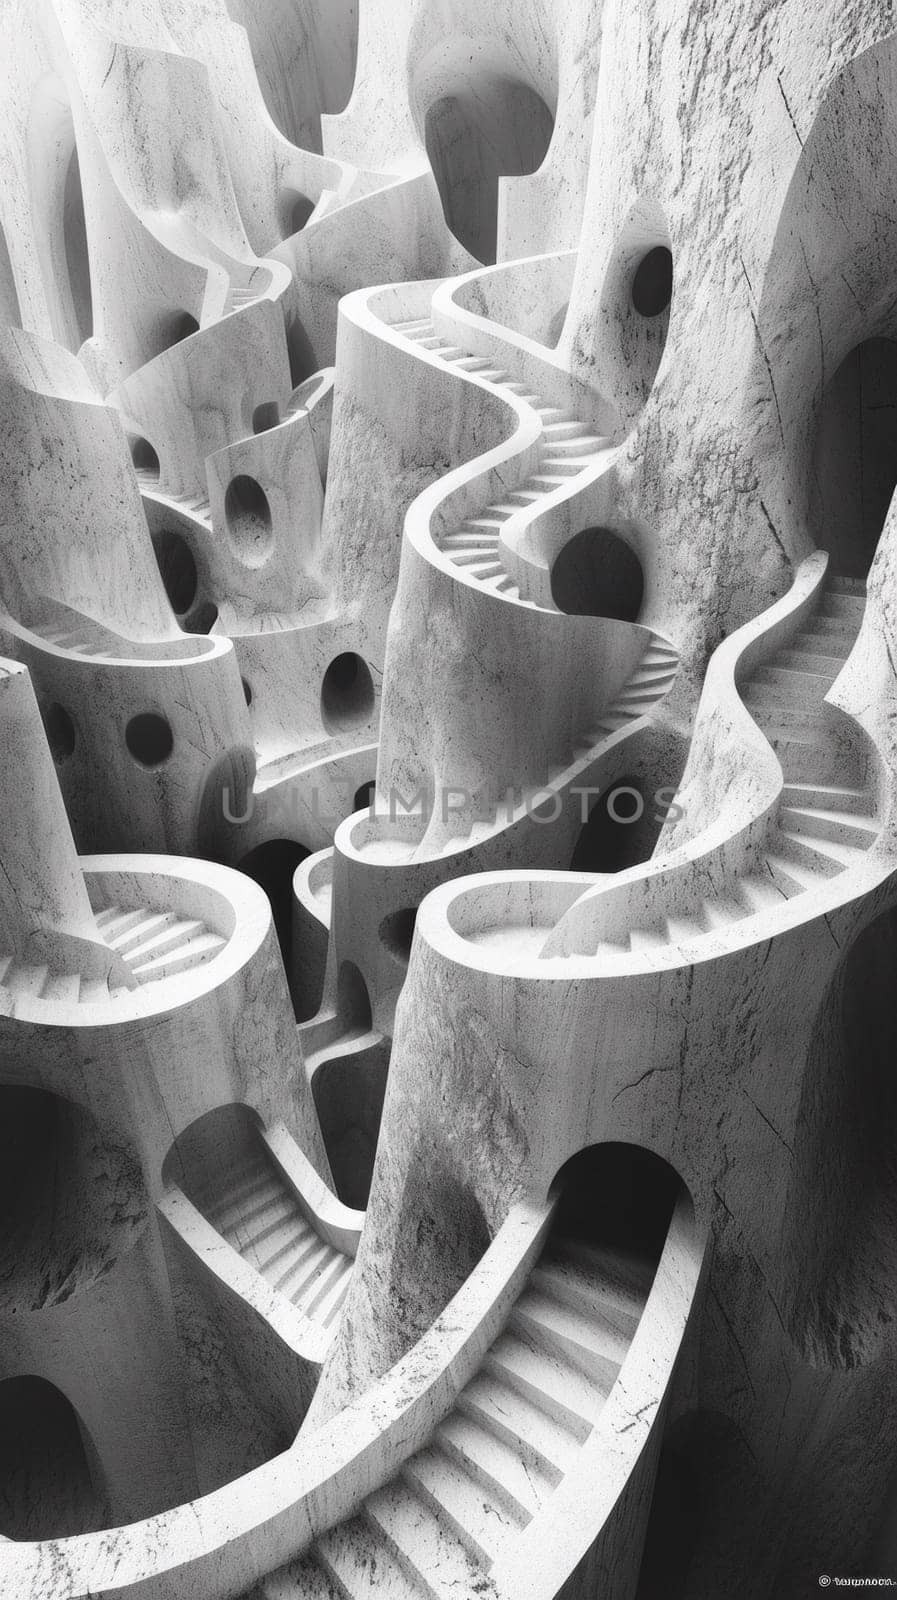 A black and white photo of a spiral staircase in an abstract sculpture